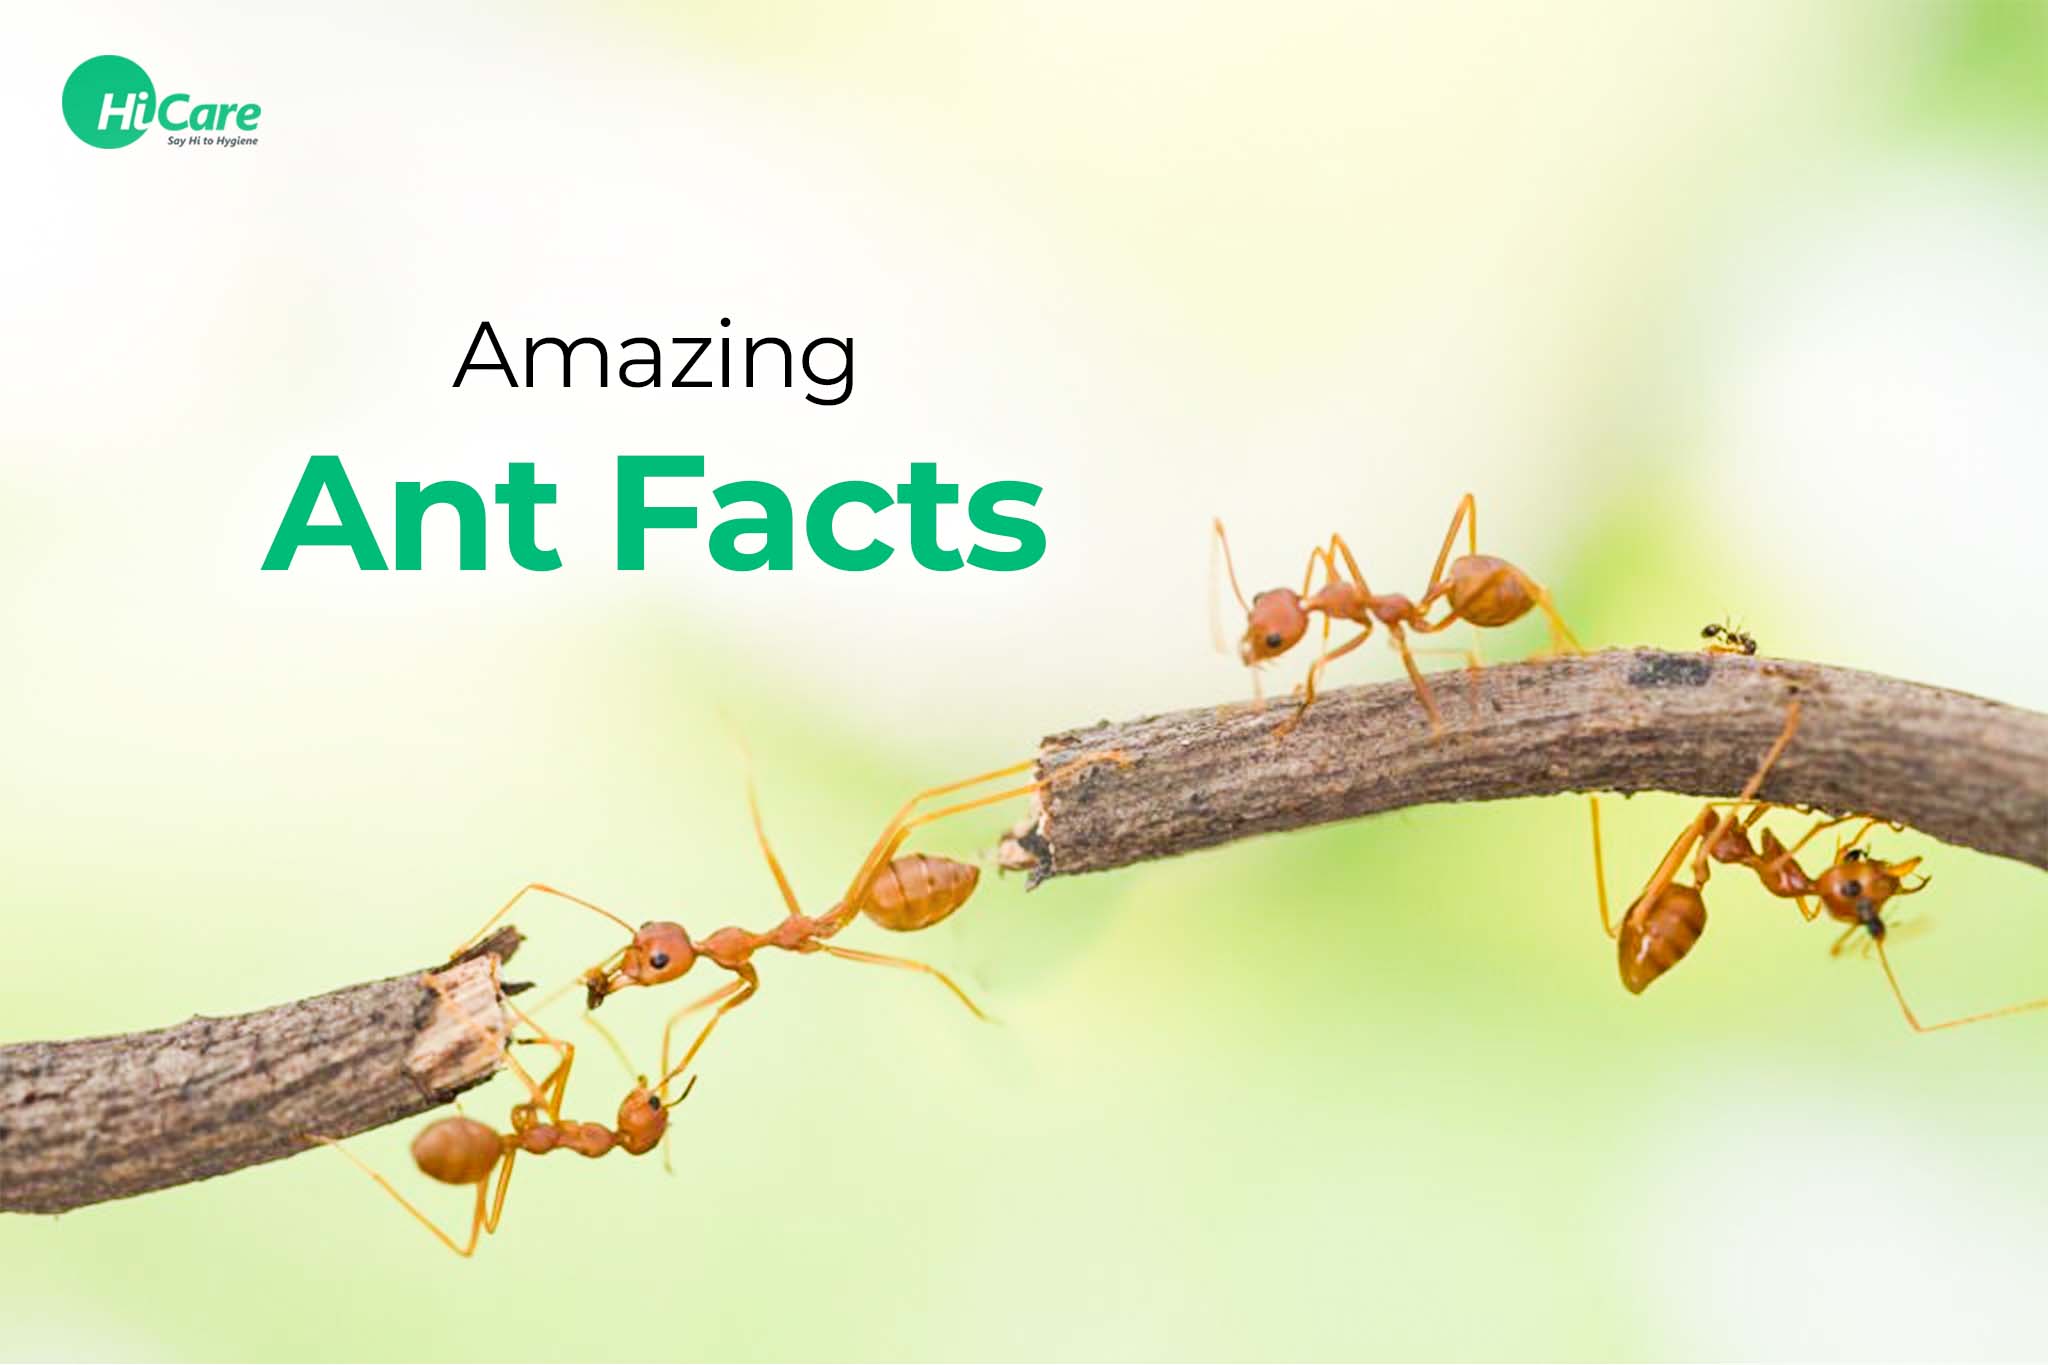 15 Interesting Facts About Ants That You’ve Never Heard of